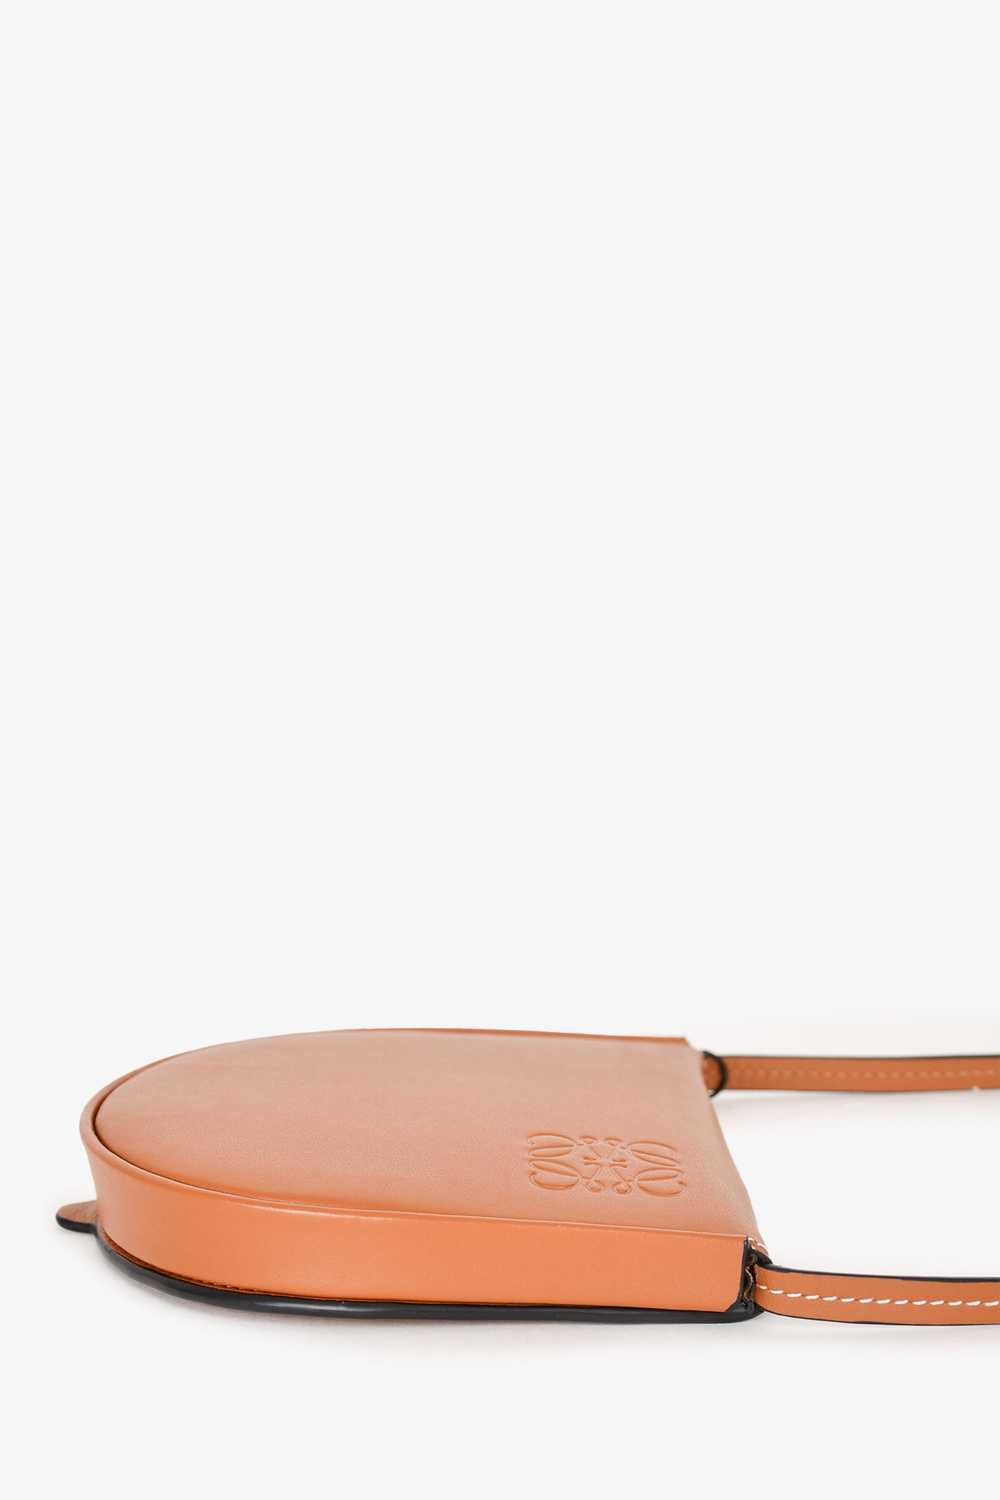 Loewe Brown Leather Small 'Heel' Crossbody Pouch - image 3